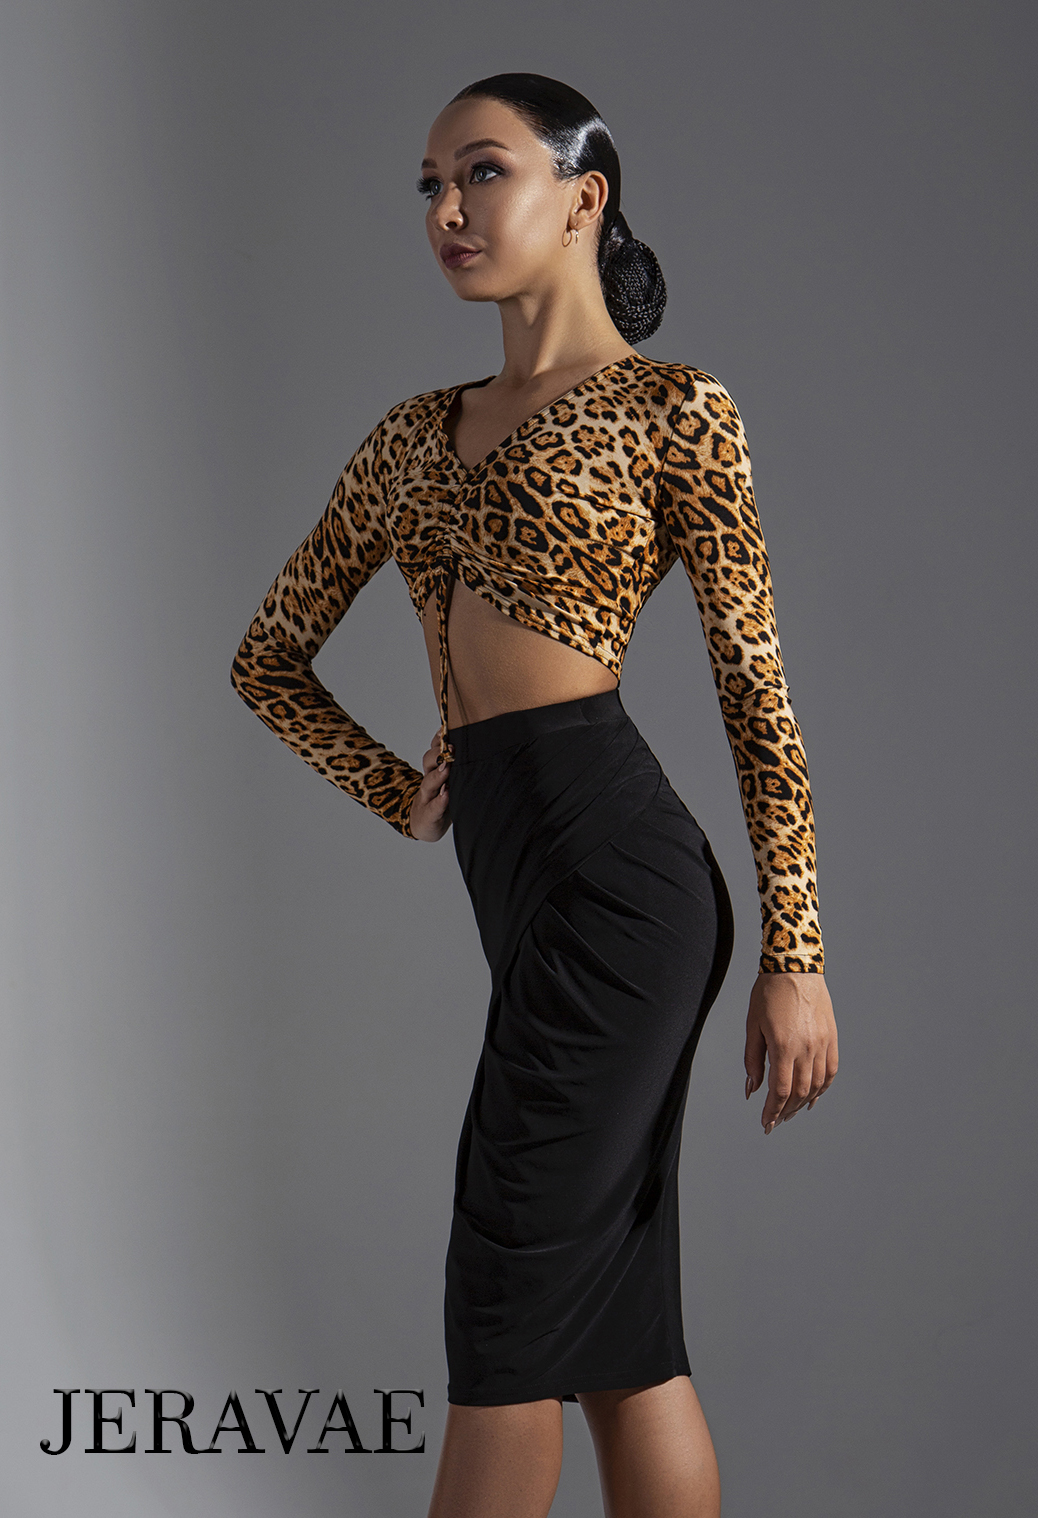 Long Sleeve Crop Top Practice Top with Optional Gather Tie Available in Leopard Print or Floral PRA 607